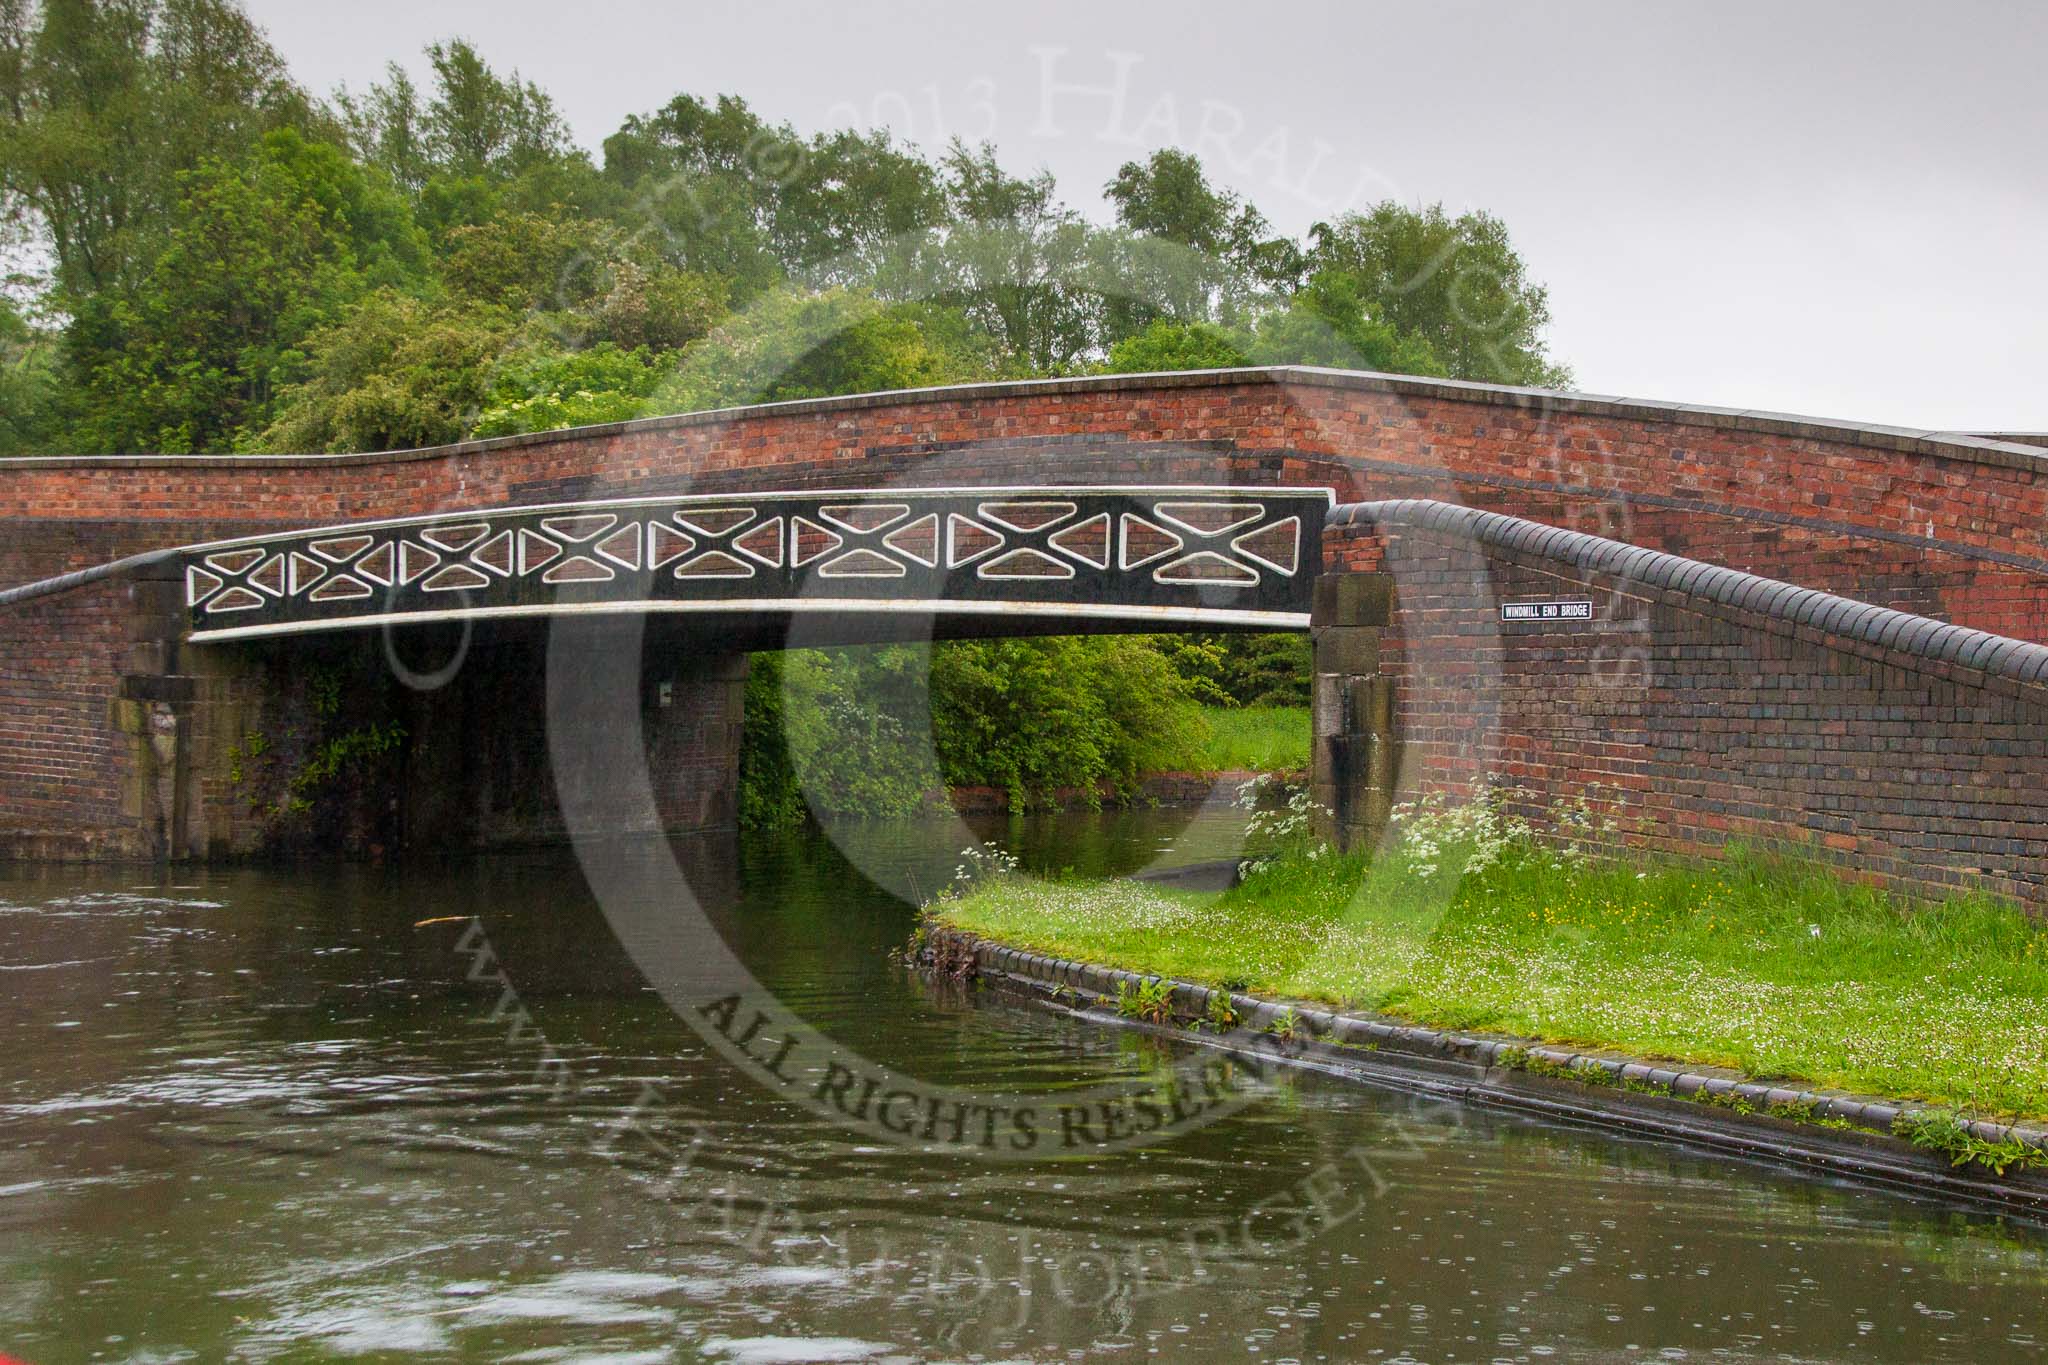 BCN Marathon Challenge 2014: Windmill End Bridge at Windmill End Junction, where the Dudley No 2 Canal meets the Dudley No 1 Canal.
Birmingham Canal Navigation,


United Kingdom,
on 25 May 2014 at 06:37, image #203